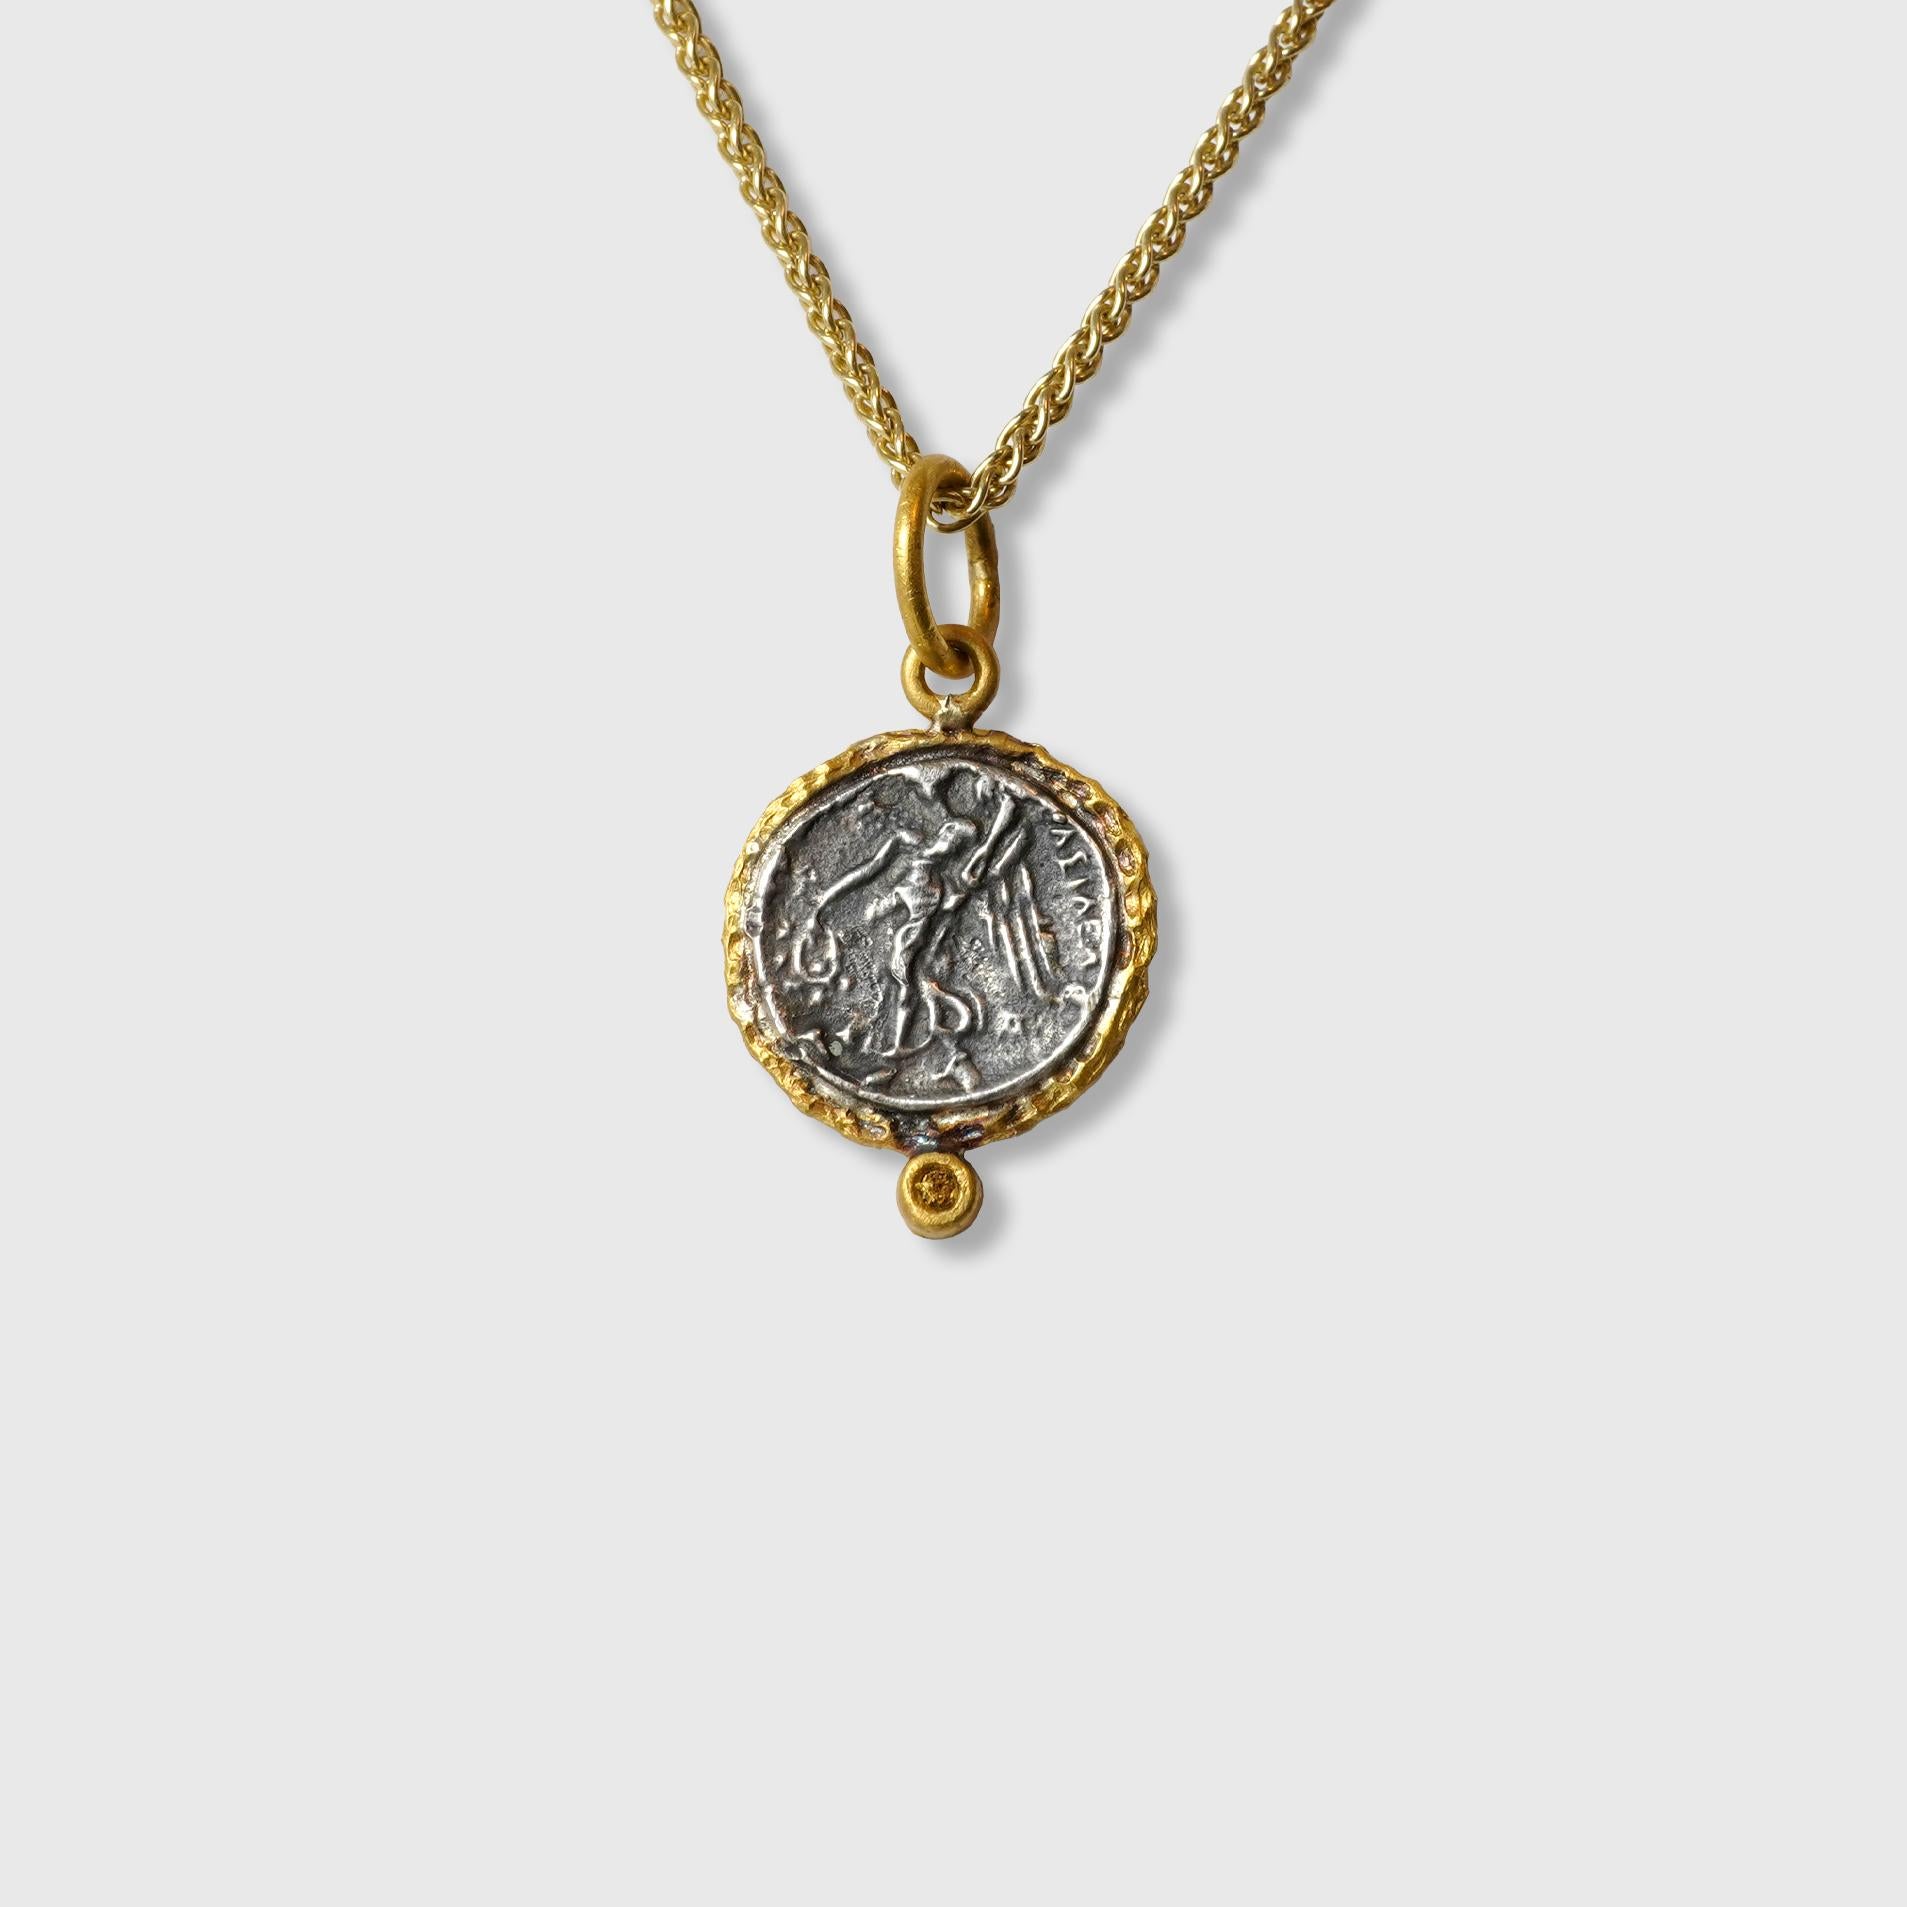 Ancient Athena - Wisdom Goddess - Coin (Replica) Tetradrachm Charm Pendant, 24kt Gold, Silver & 0.02ct Diamond

Silver coin of Athena is a replica of ancient Tetradrachm coins in the Turkish Museum. 

DETAILS:
Diamond - 0.02ct
24kt Gold 995 - 1.10